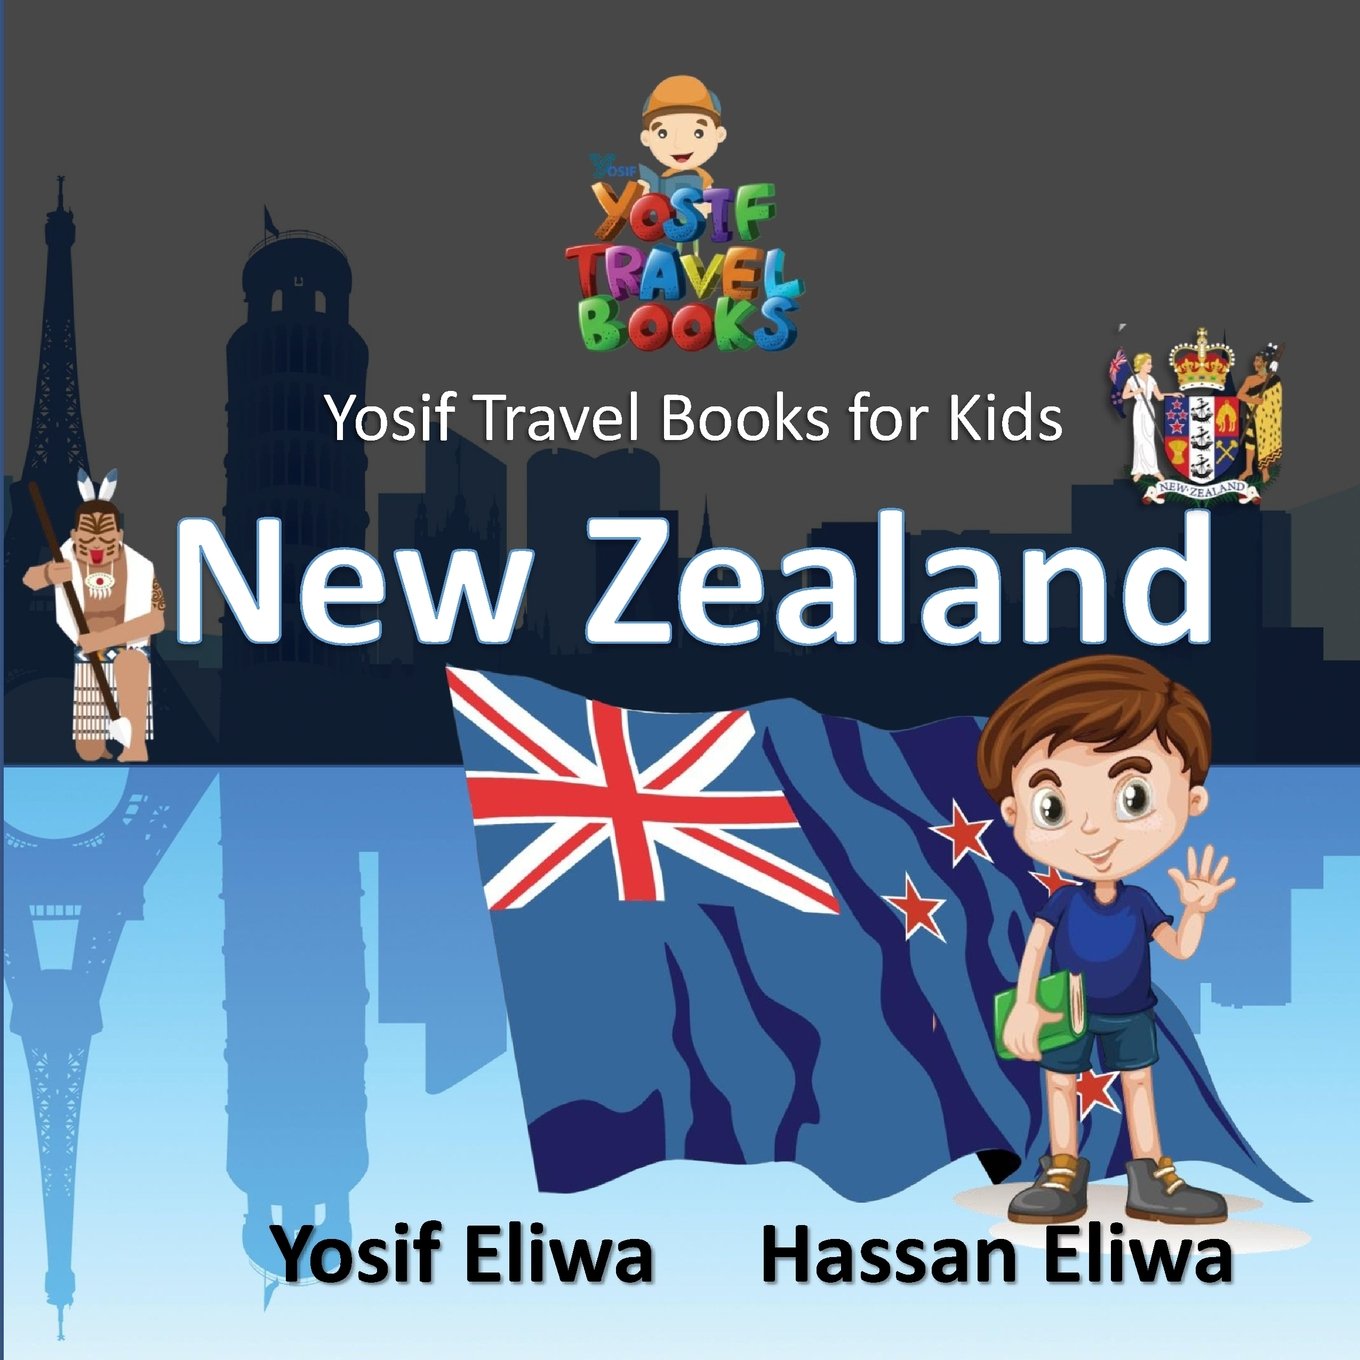 Yosif Travel Books for Kids - New Zealand: All Kids join Yosif to discover New Zealand (Yosif's Travel Books Series)